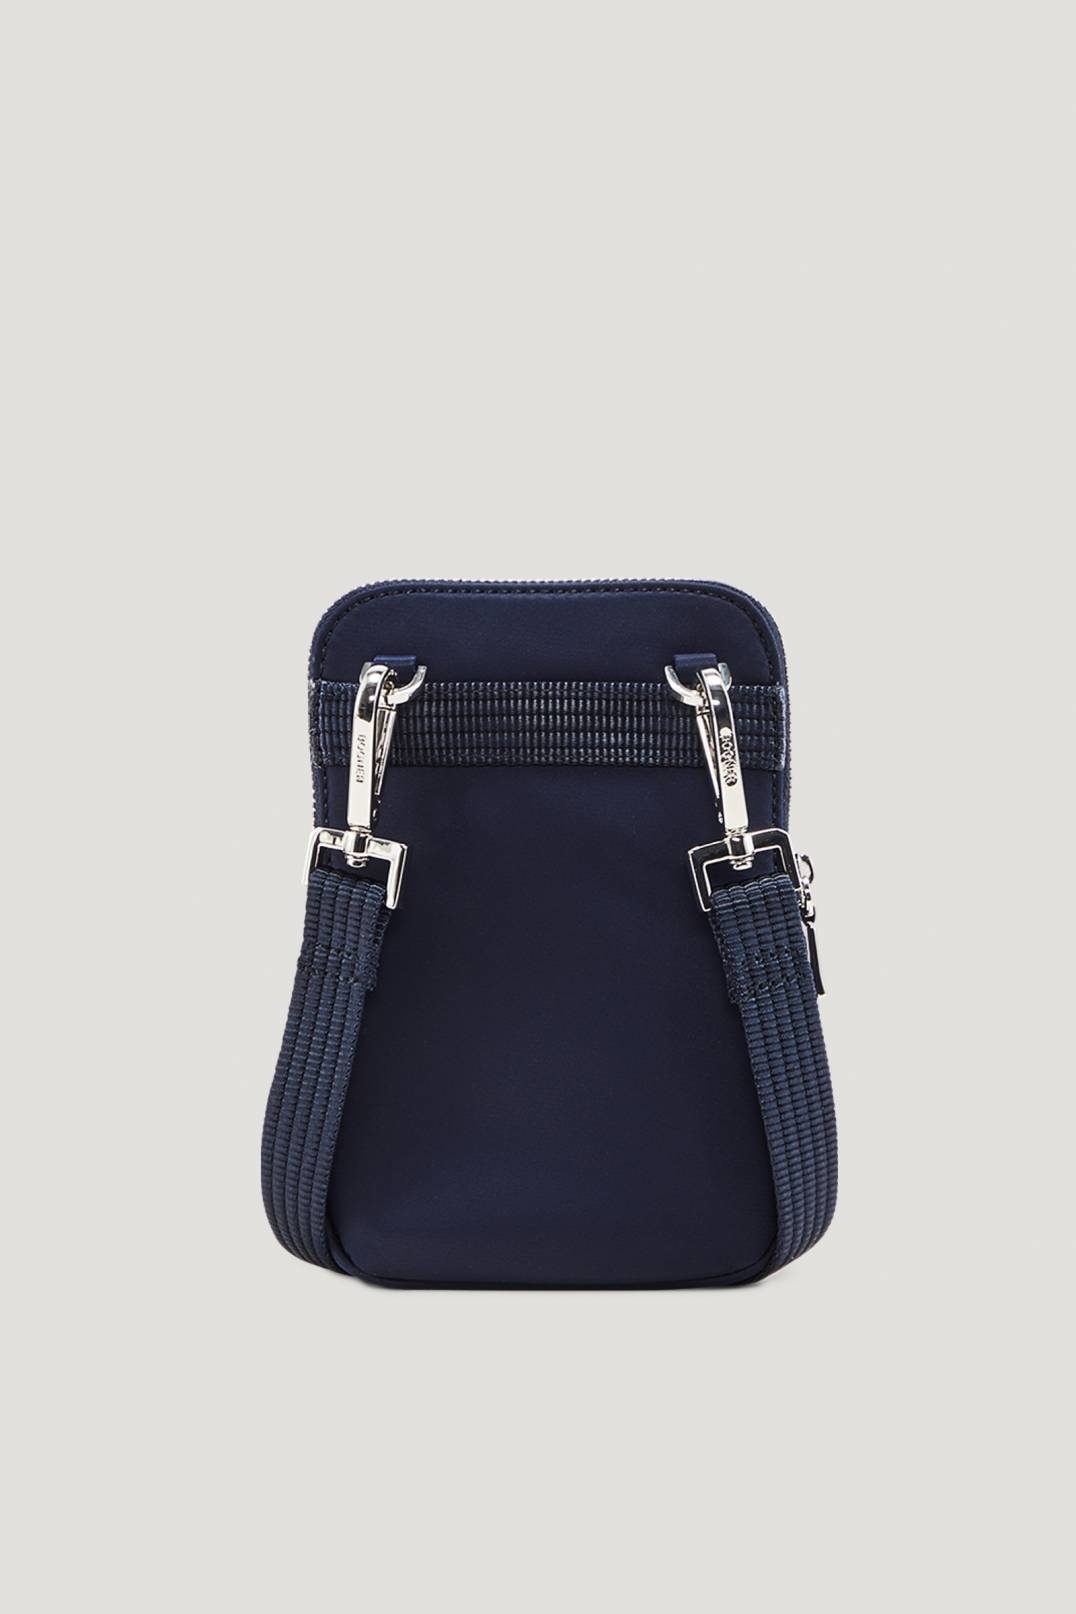 VERBIER PLAY JOHANNA SMARTPHONE POUCH IN NAVY BLUE - 3